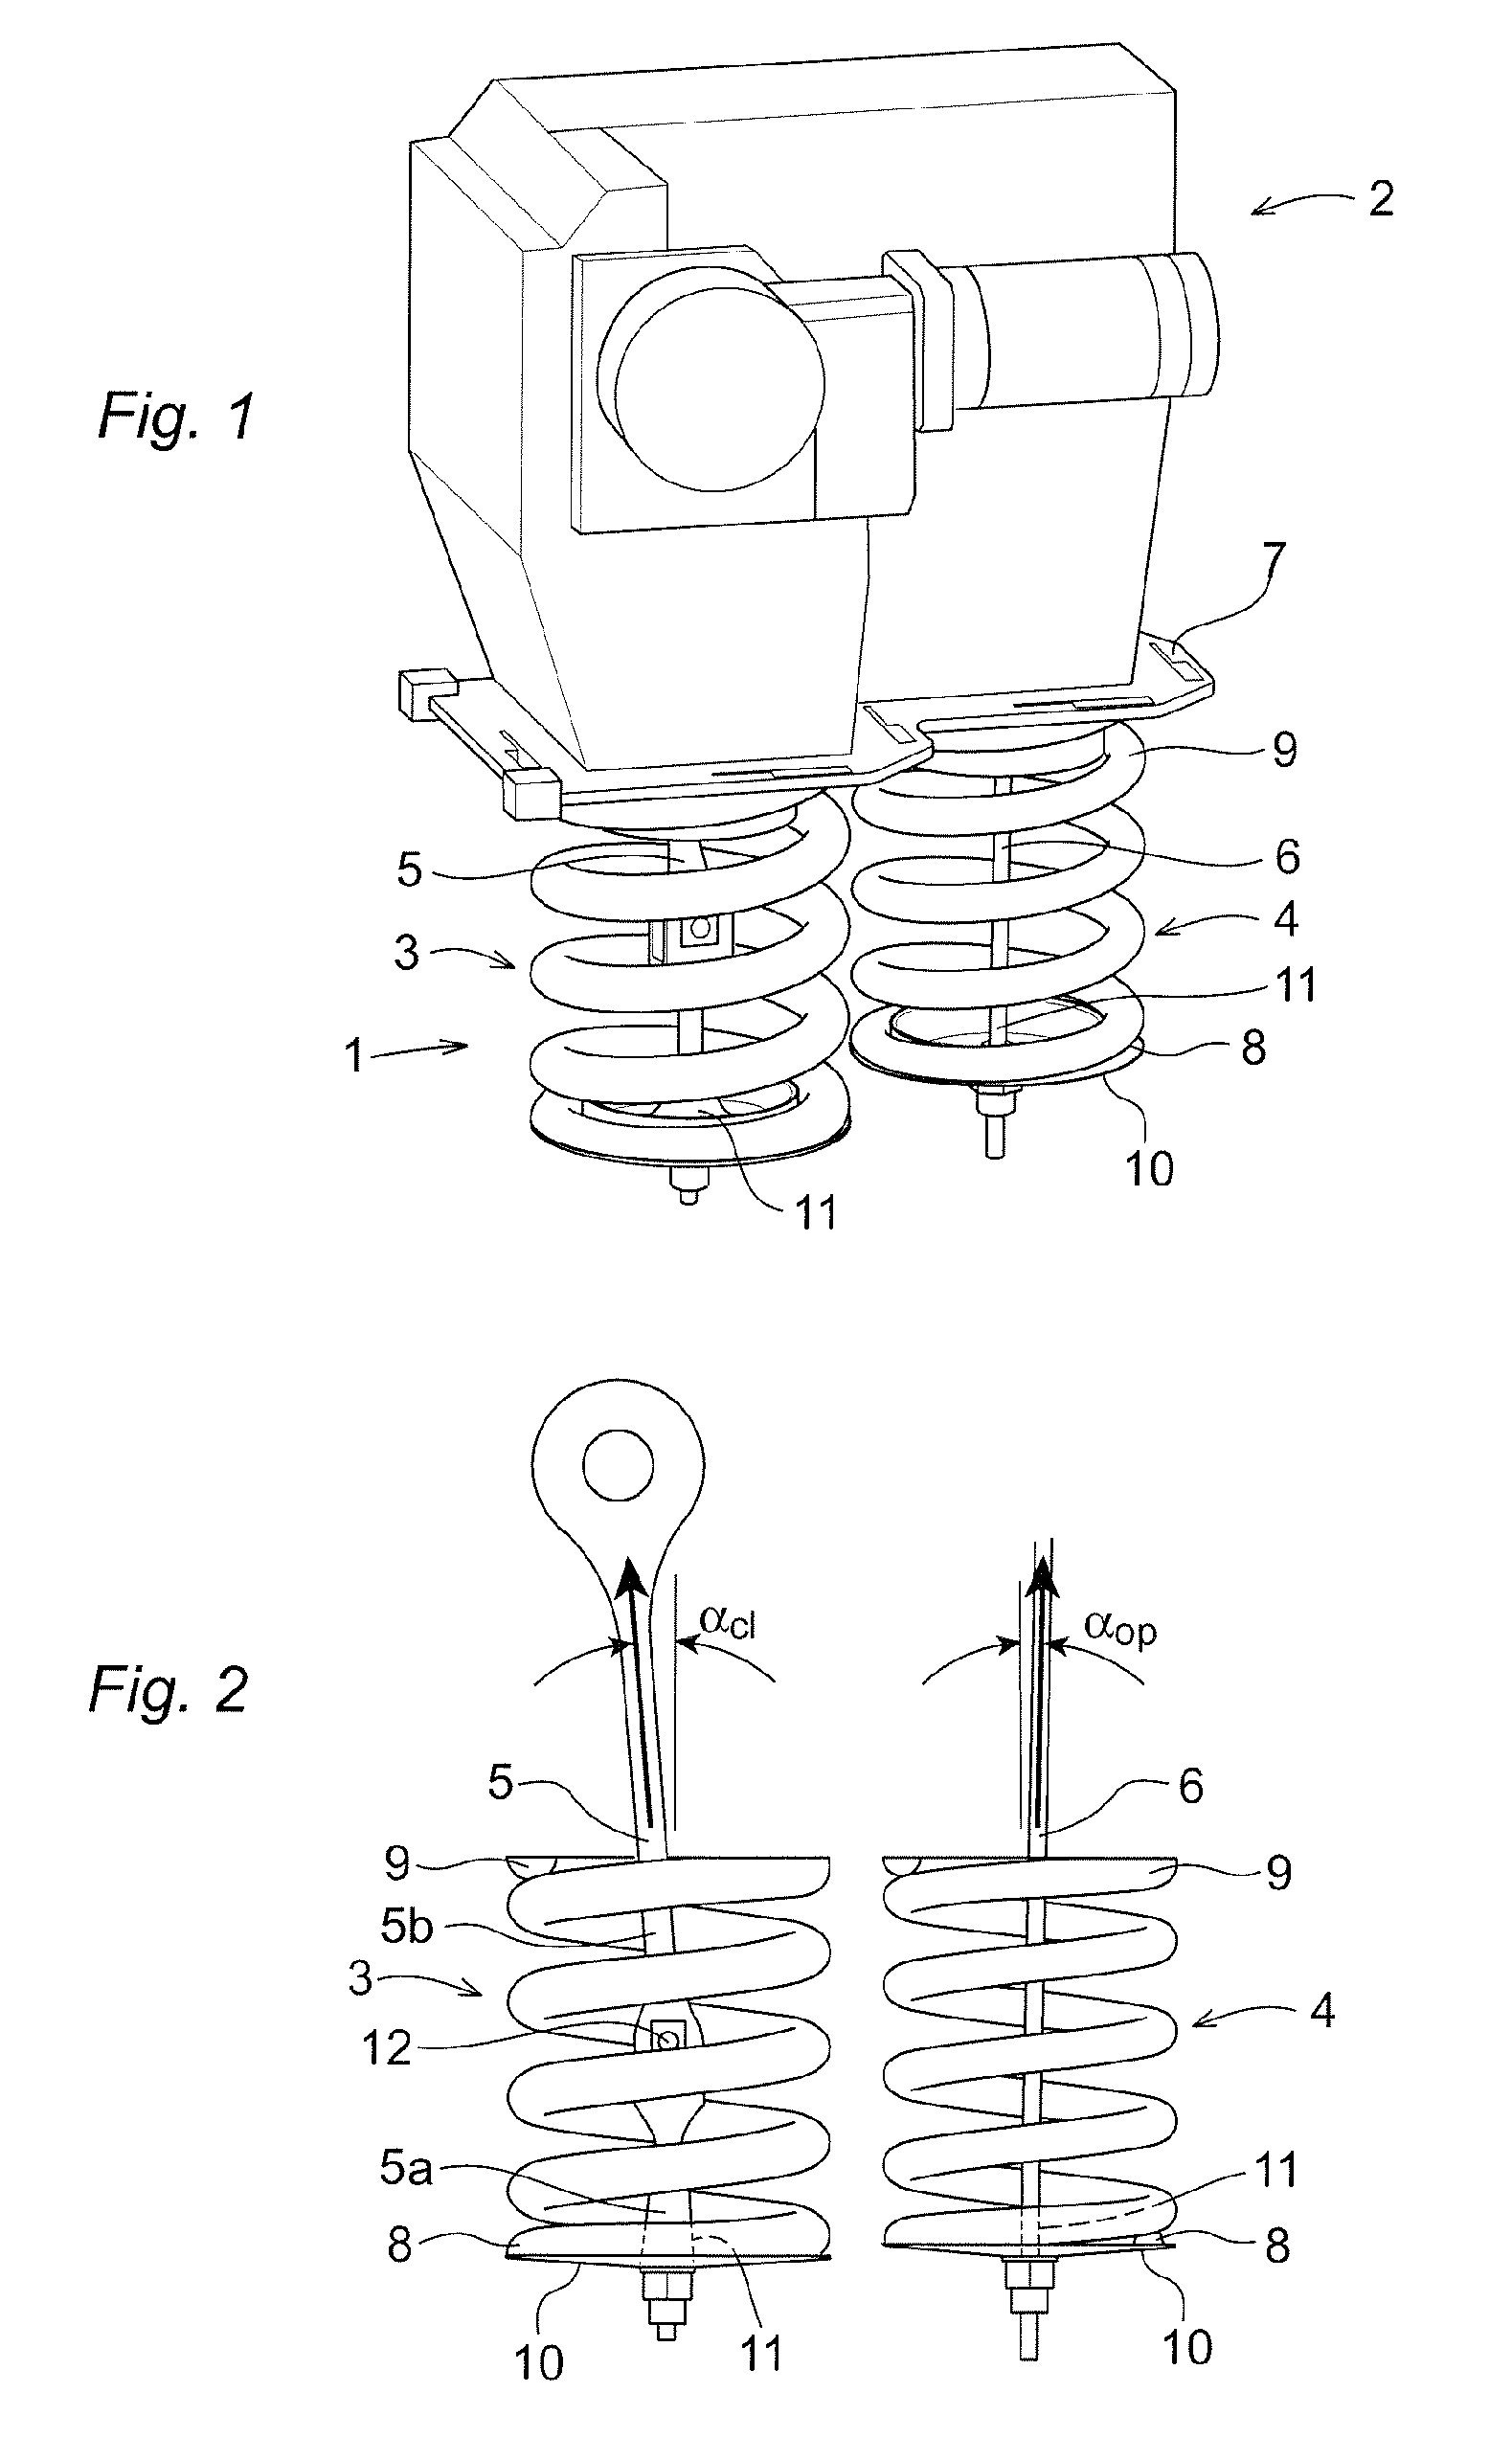 Spring Arrangement For Spring Drive Unit And Spring Drive Unit Comprising Spring Arrangement